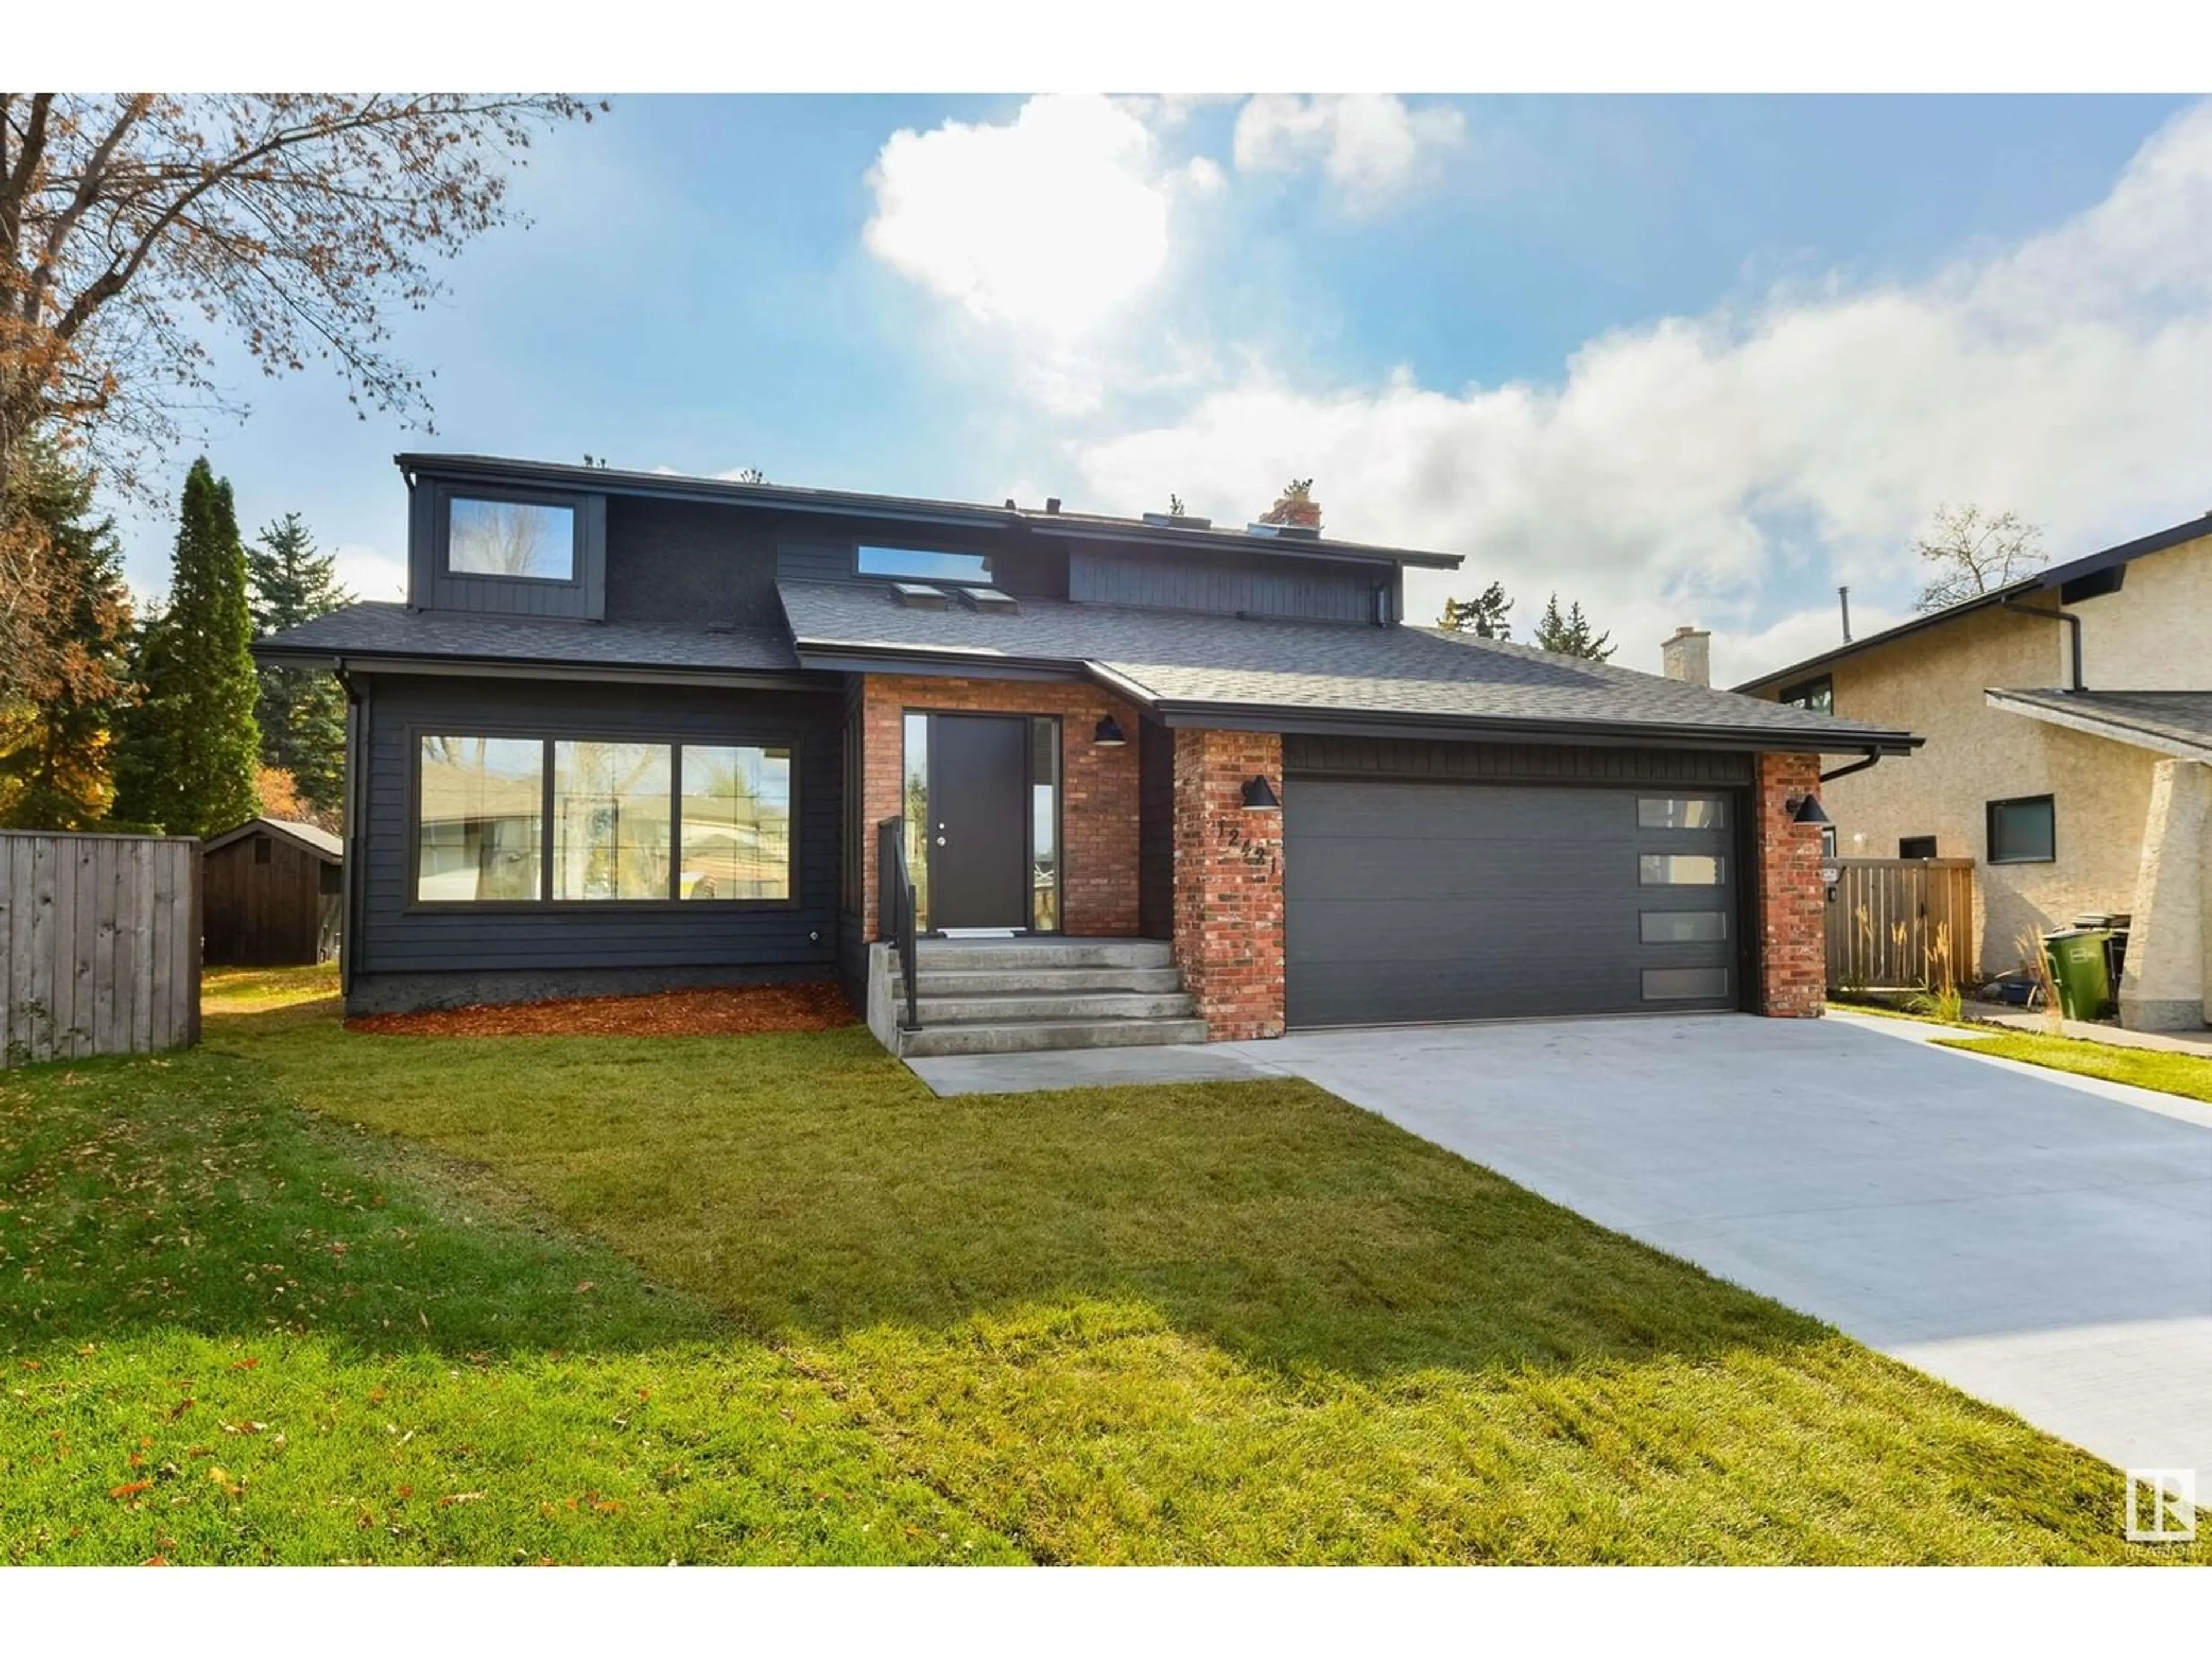 Home with brick exterior material for 12421 28A AV NW, Edmonton Alberta T6J4L5